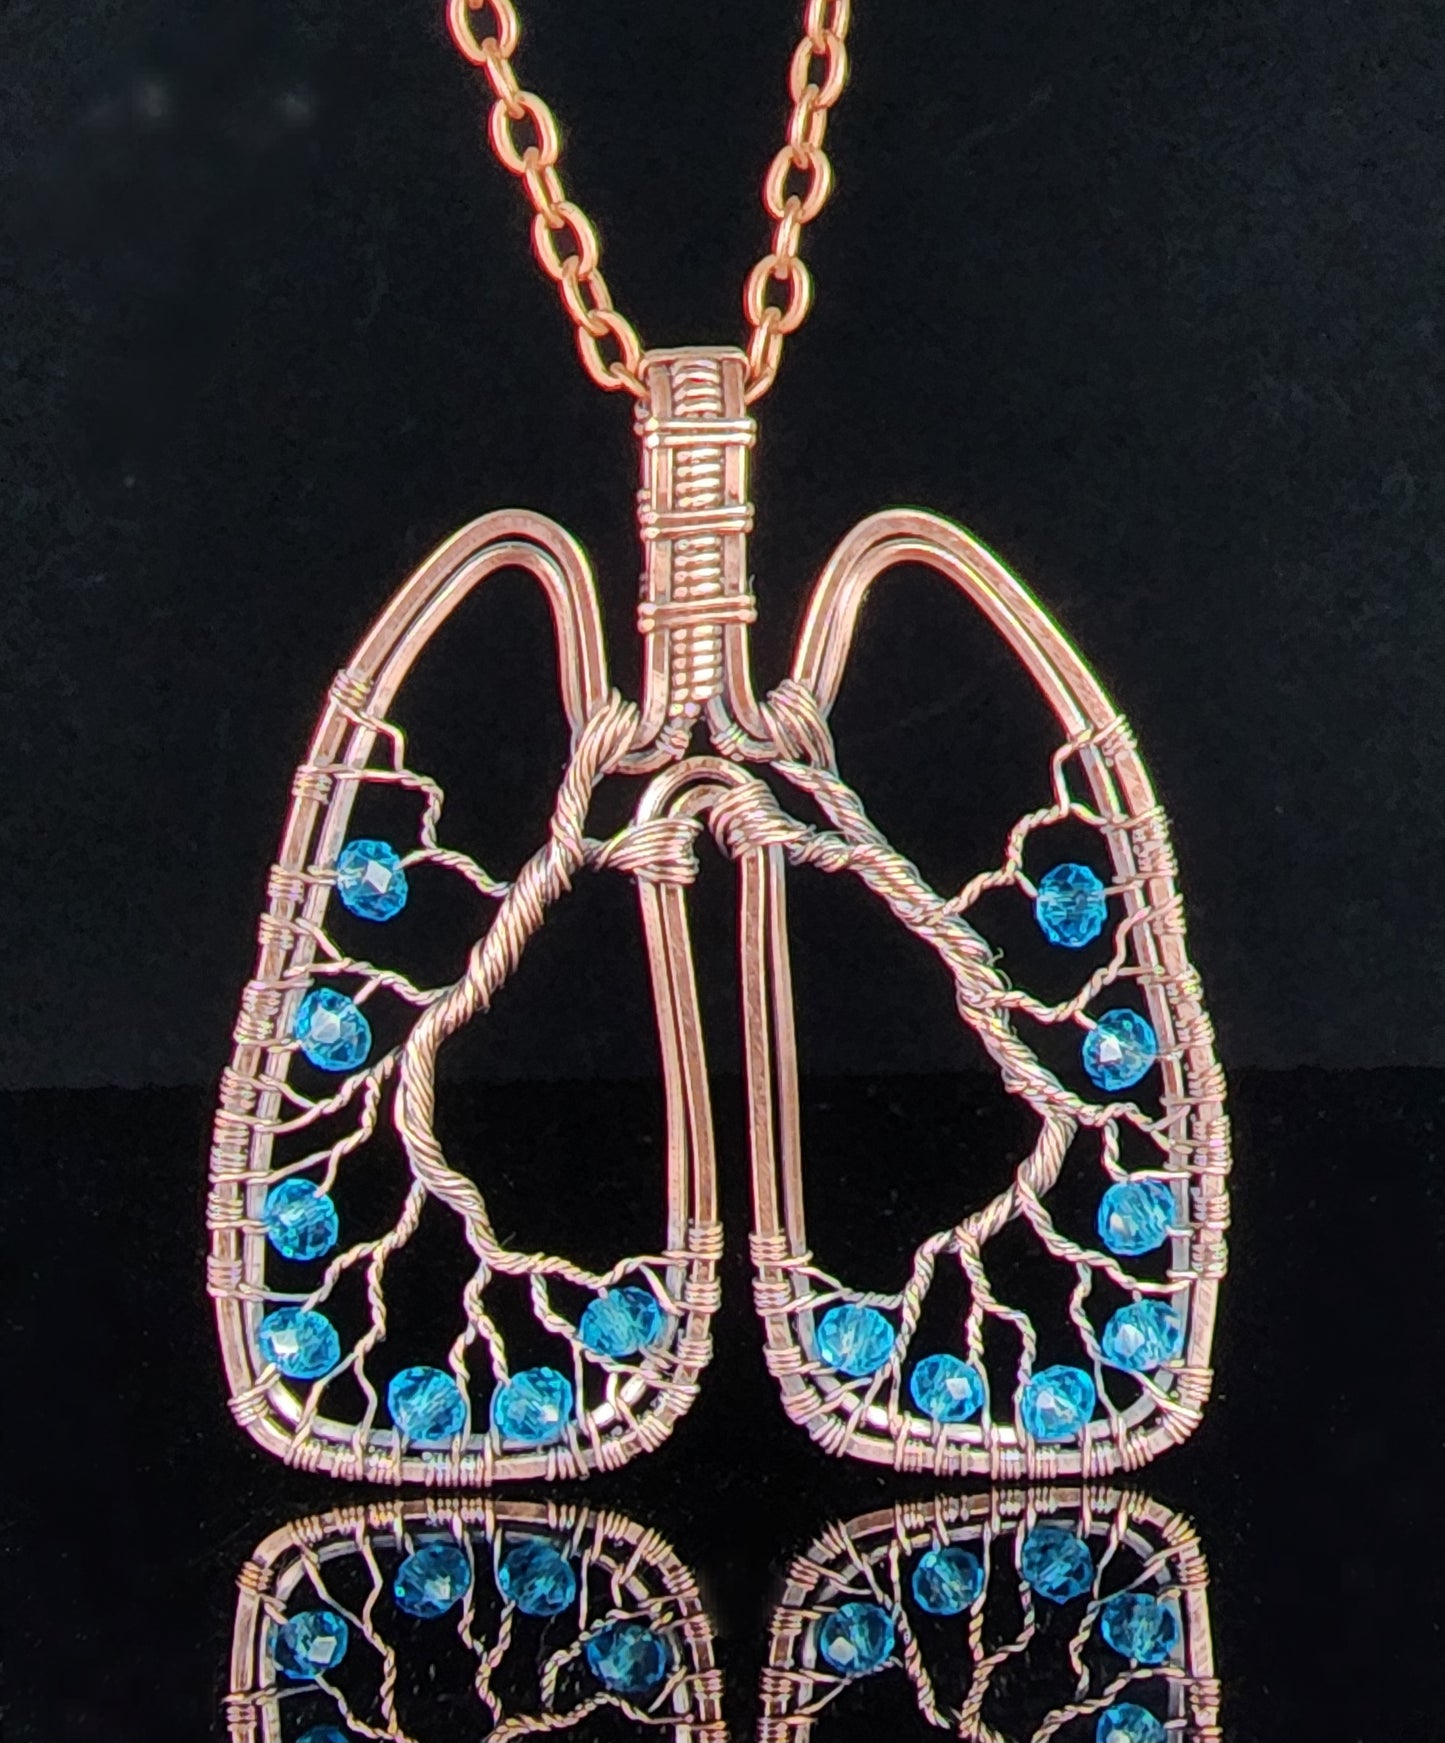 Anatomical Lungs Pendant with Pale Blue Beads